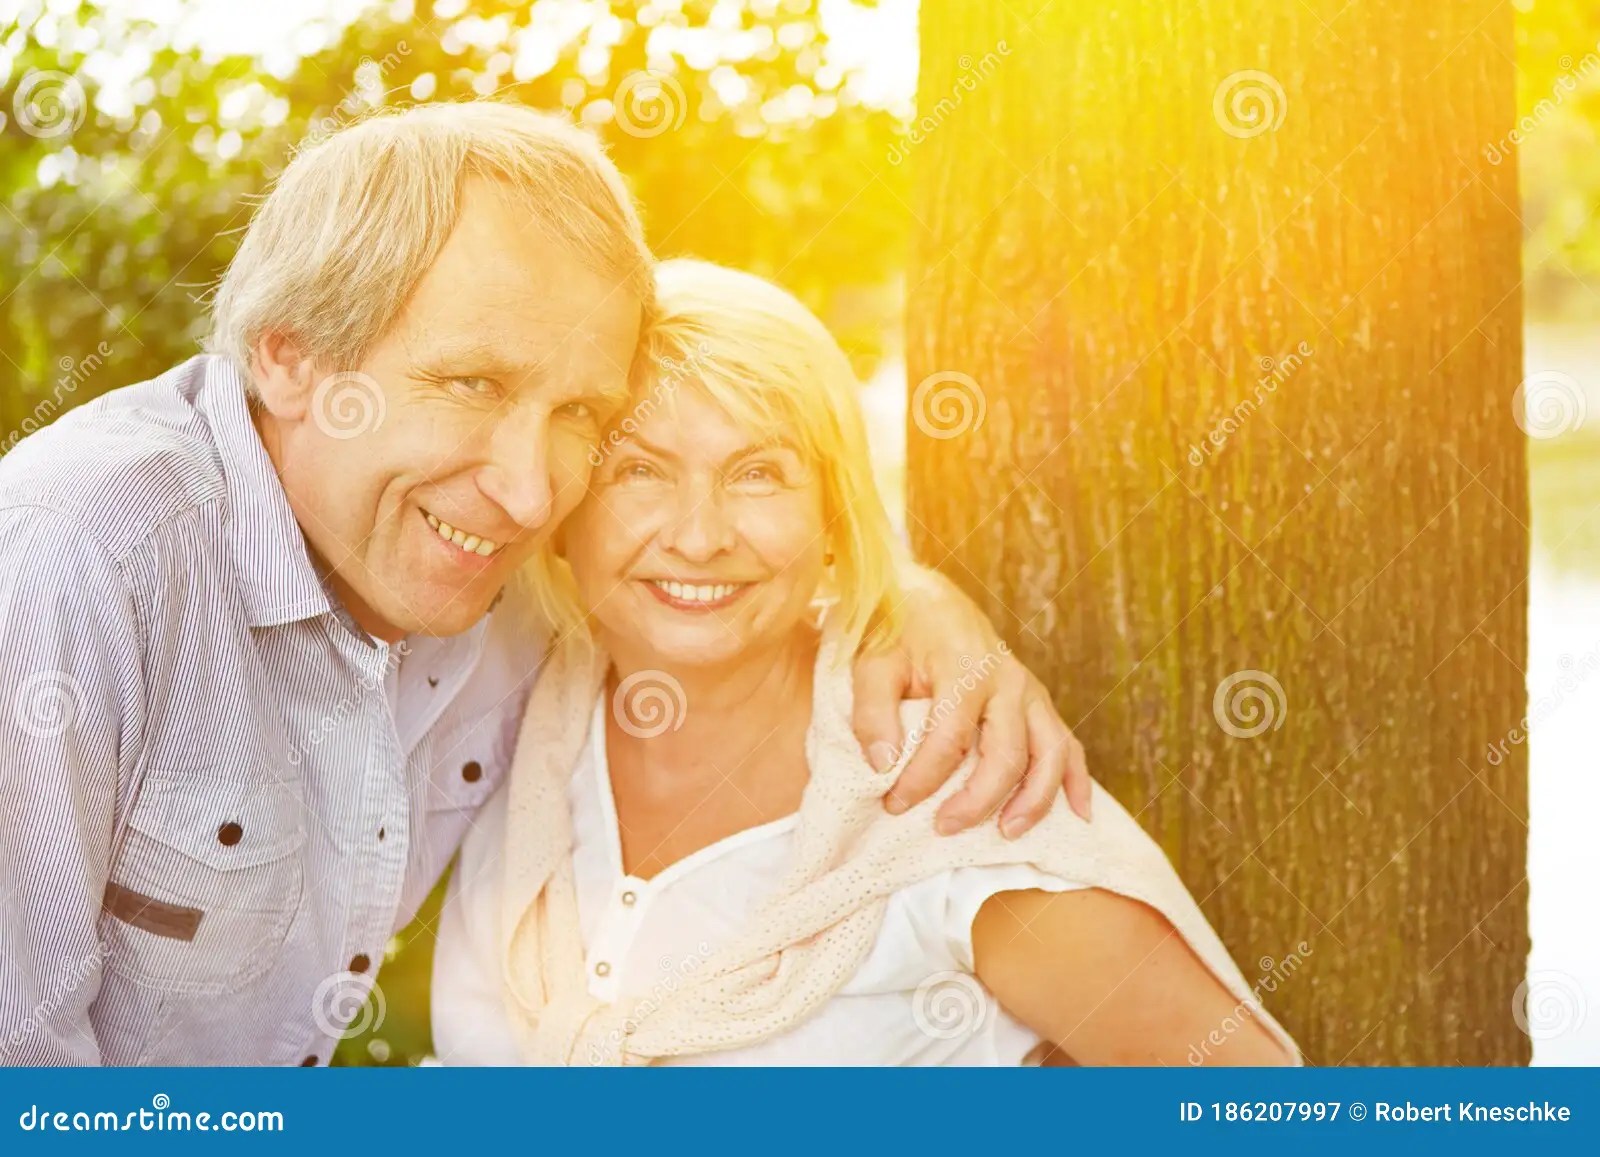 Free Dating Sites For Older Women